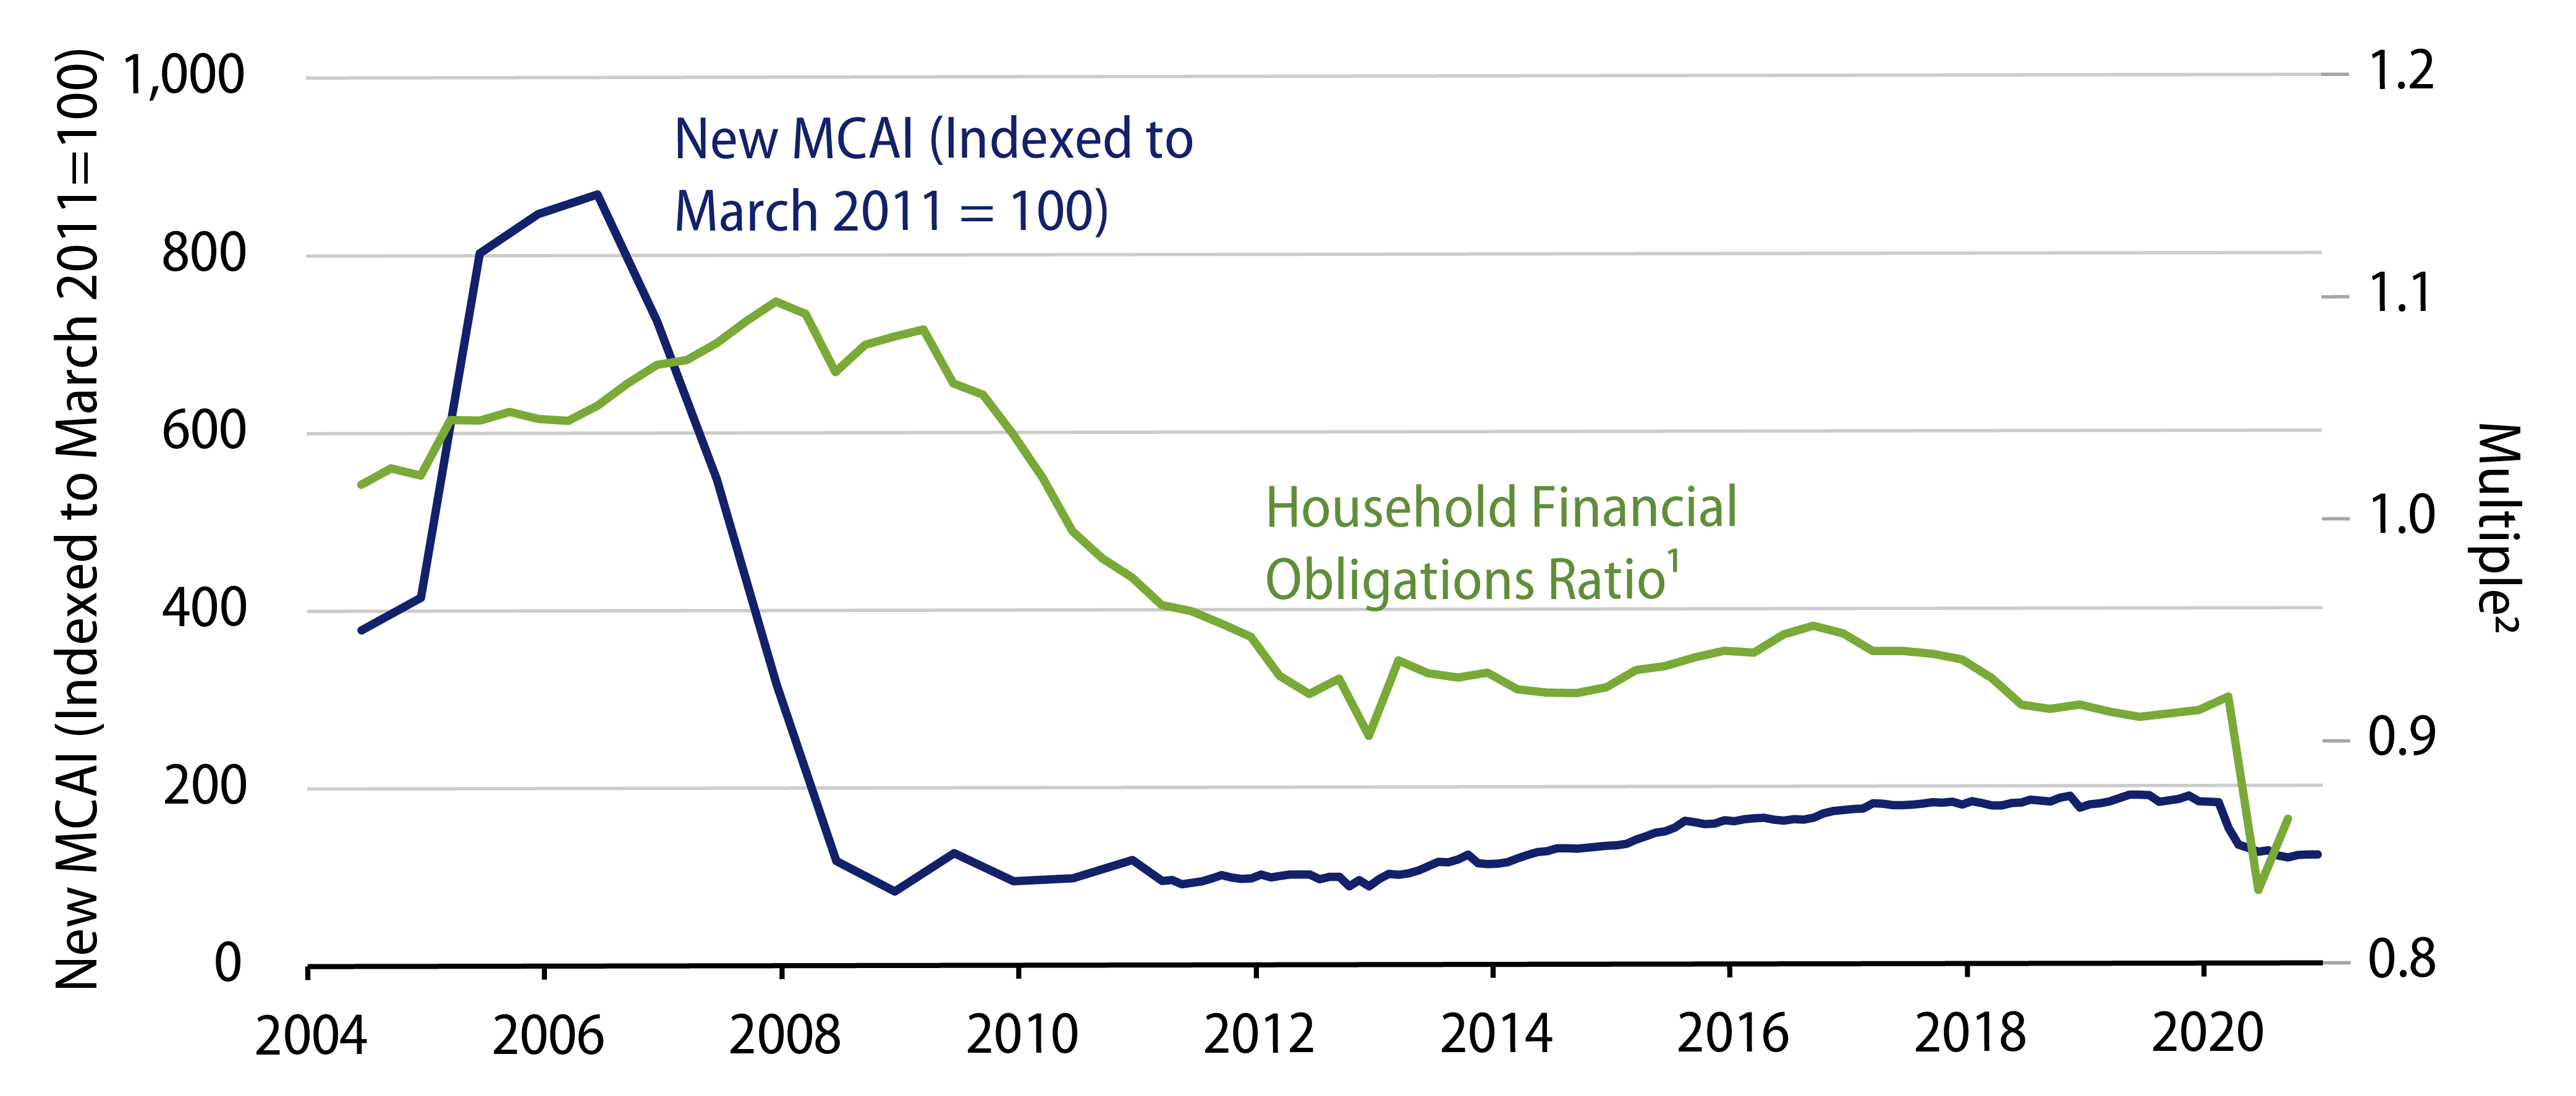 Mortgage Credit Availability Continues to Be Tight